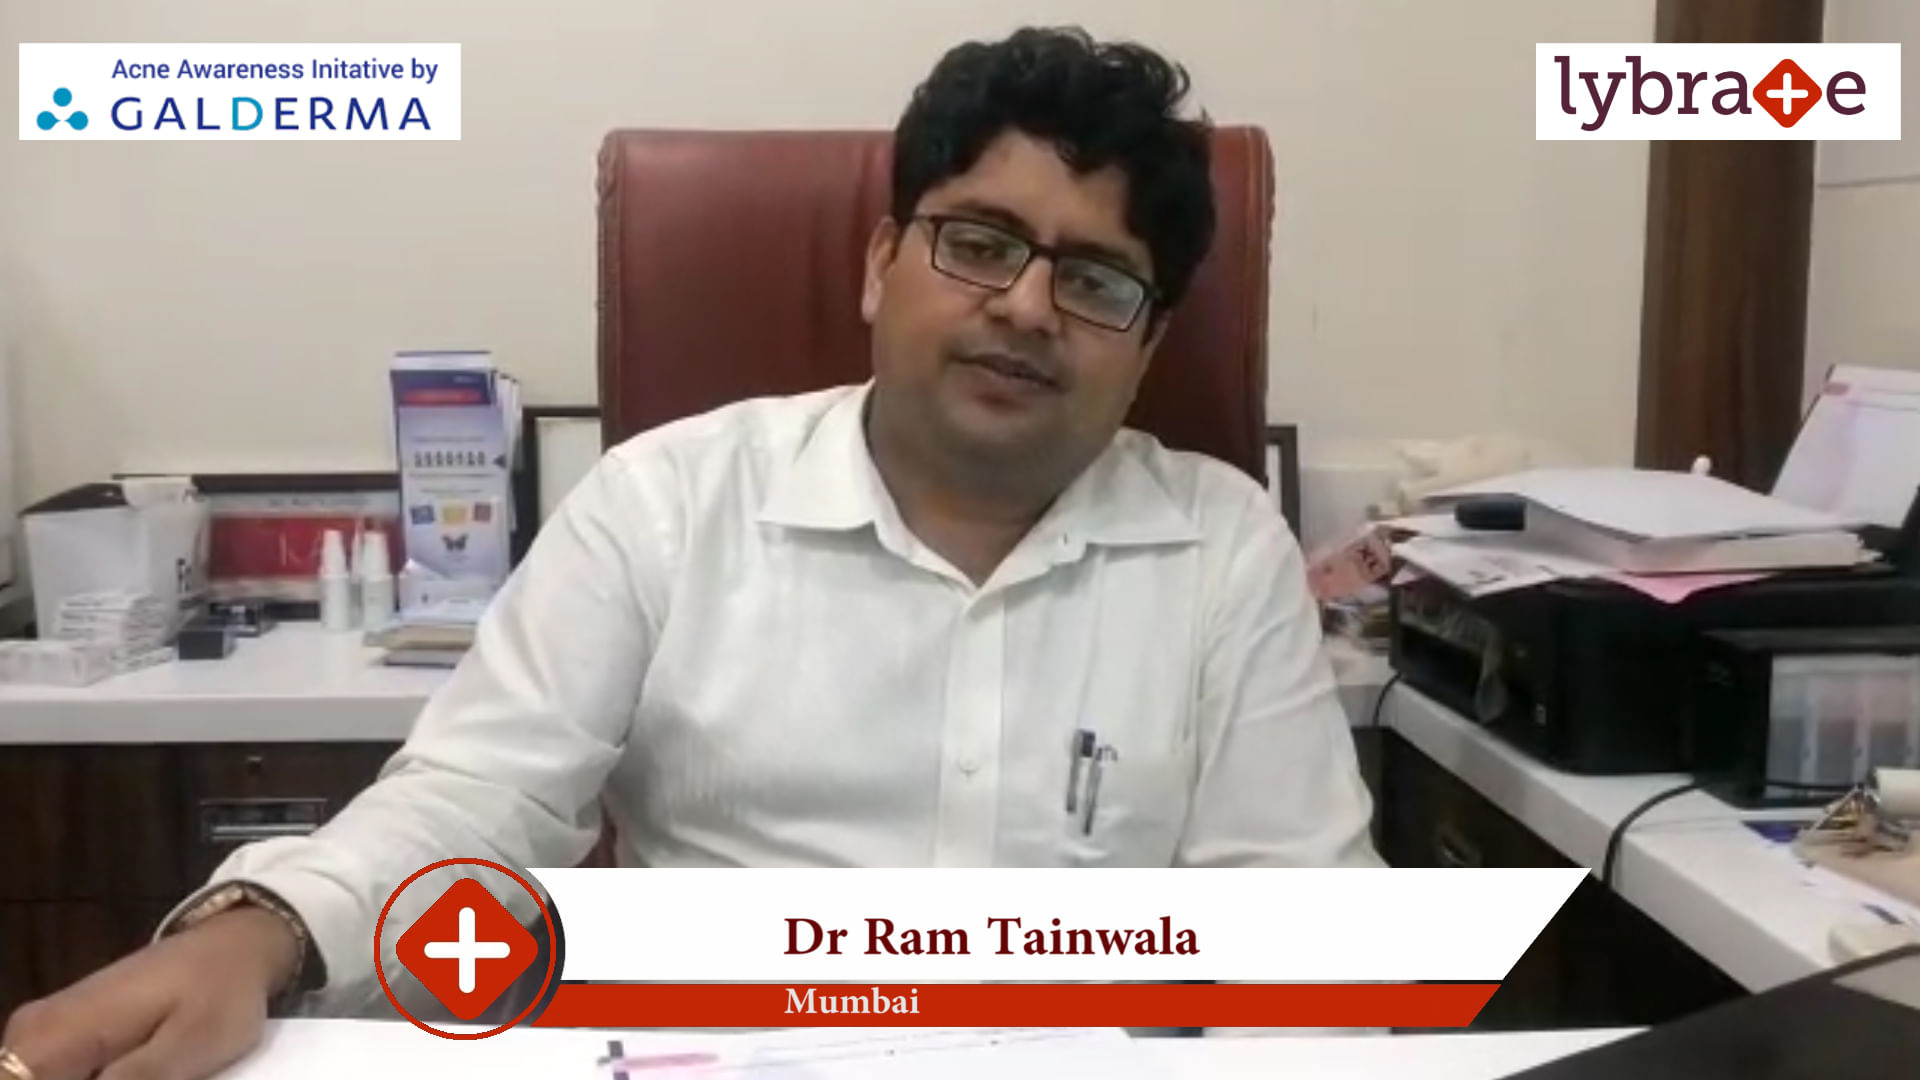 Lybrate | Dr. Ram Tainwala speaks on IMPORTANCE OF TREATING ACNE EARLY